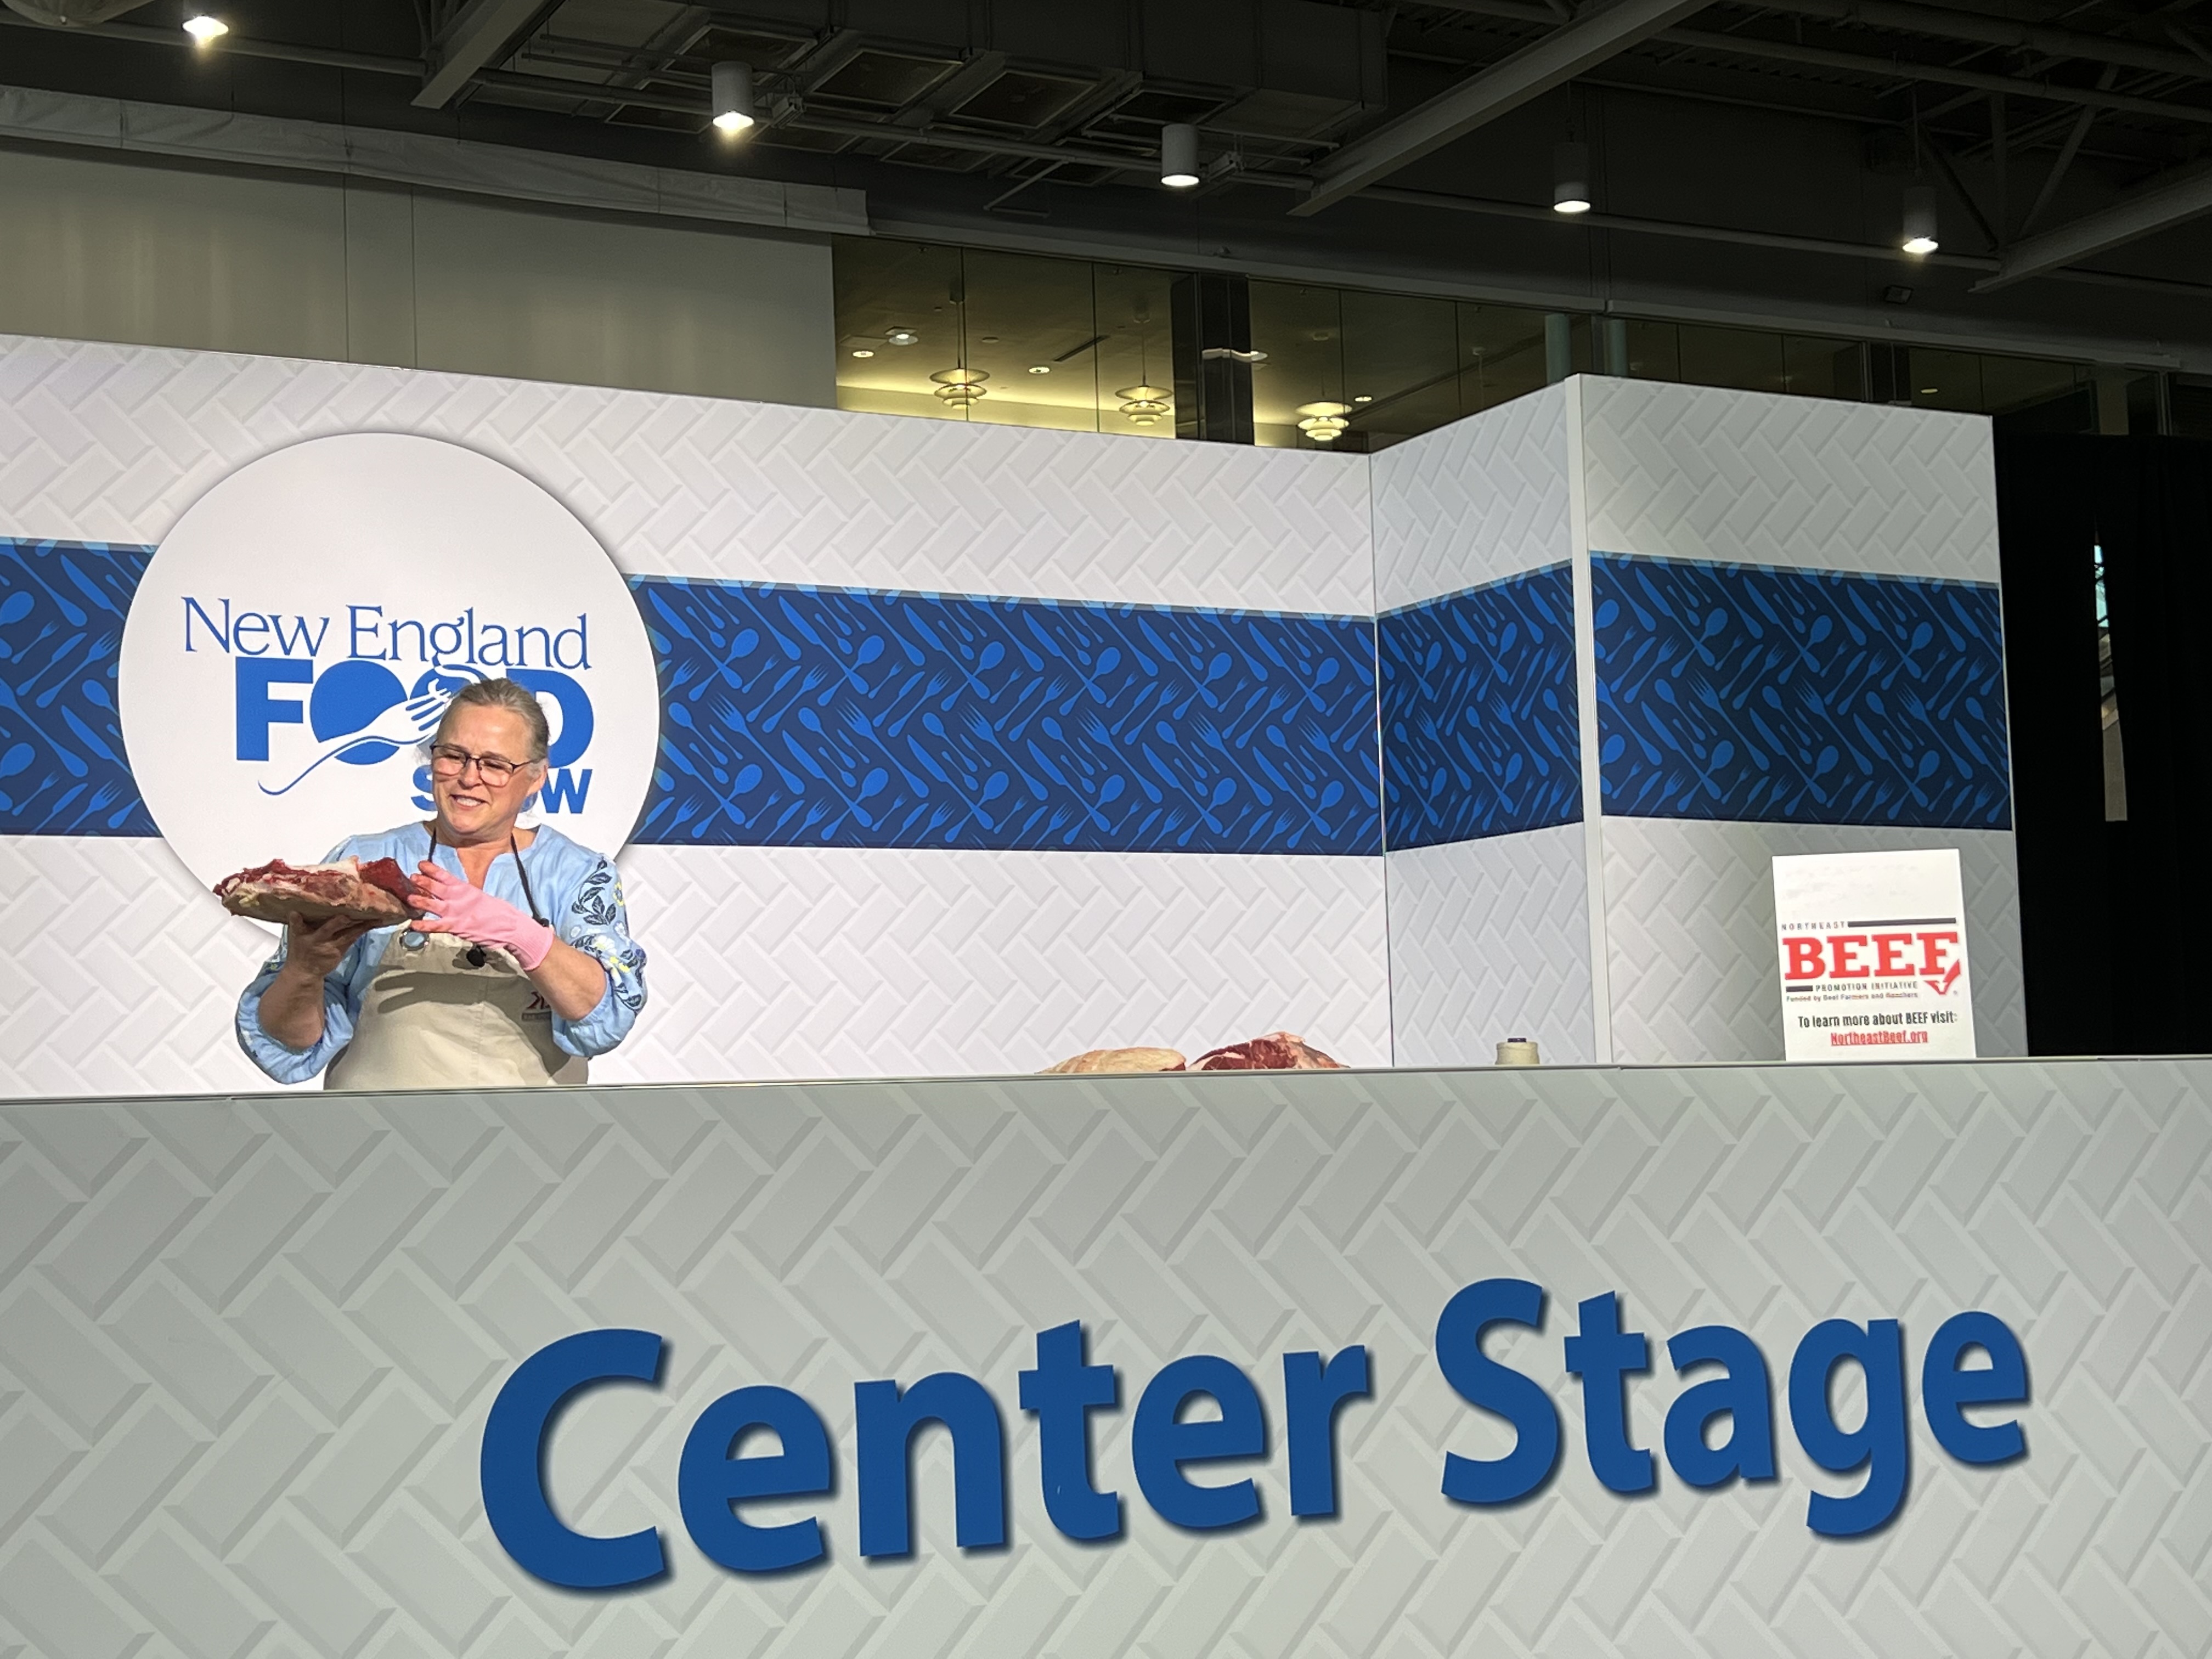 Beef took Center Stage during the 2023 New England Food Show